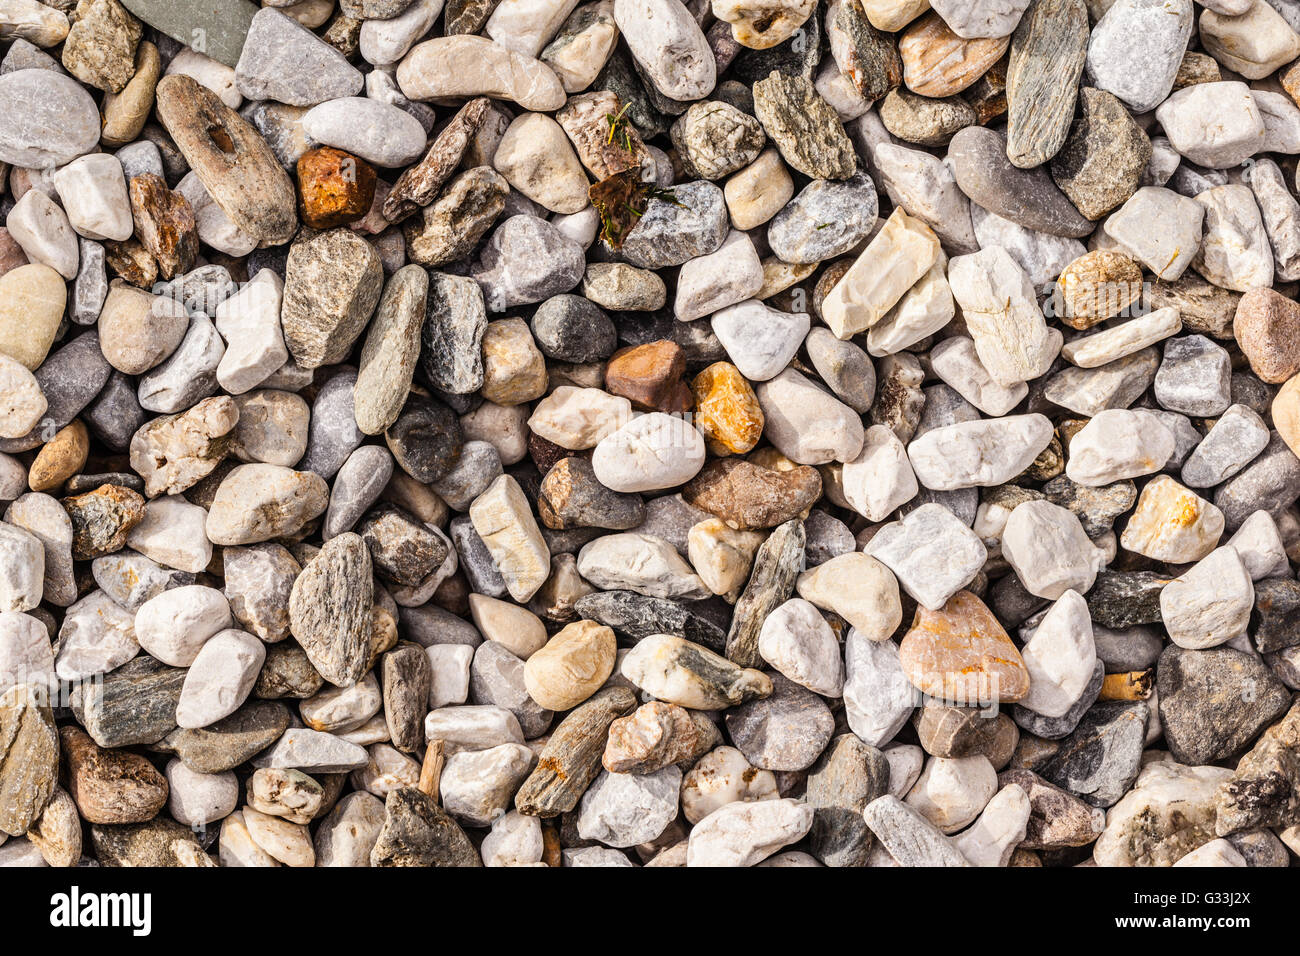 backgroung of rock gravel pebbles of different size and shape Stock Photo